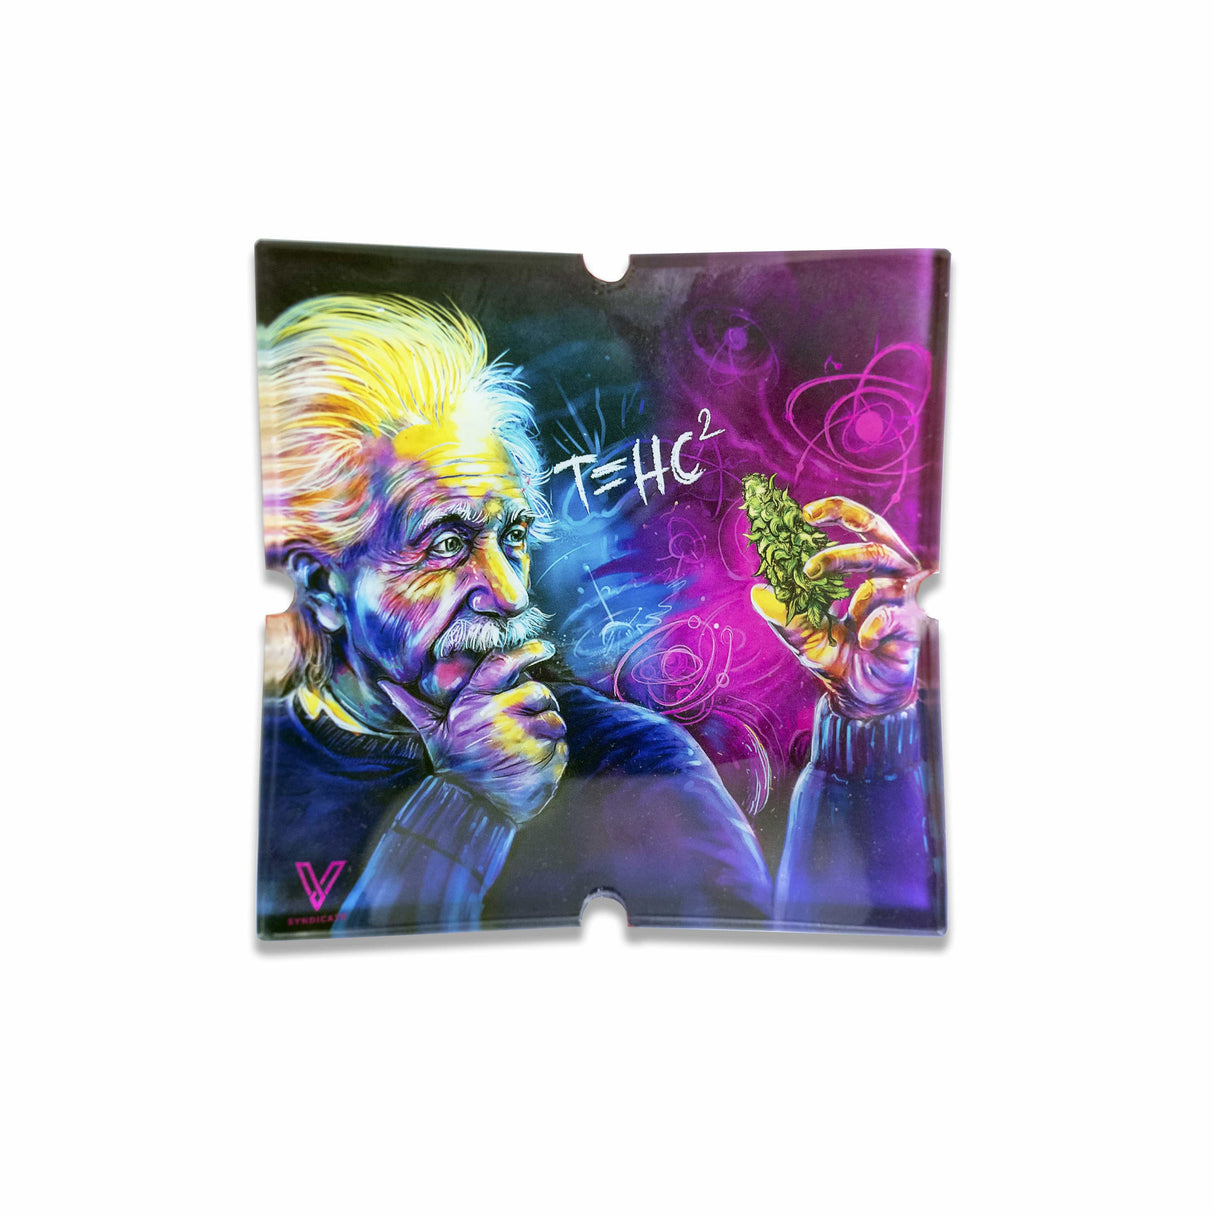 V Syndicate T=HC2 Blazin' Ashtray with Einstein Design, Compact Glass, Front View